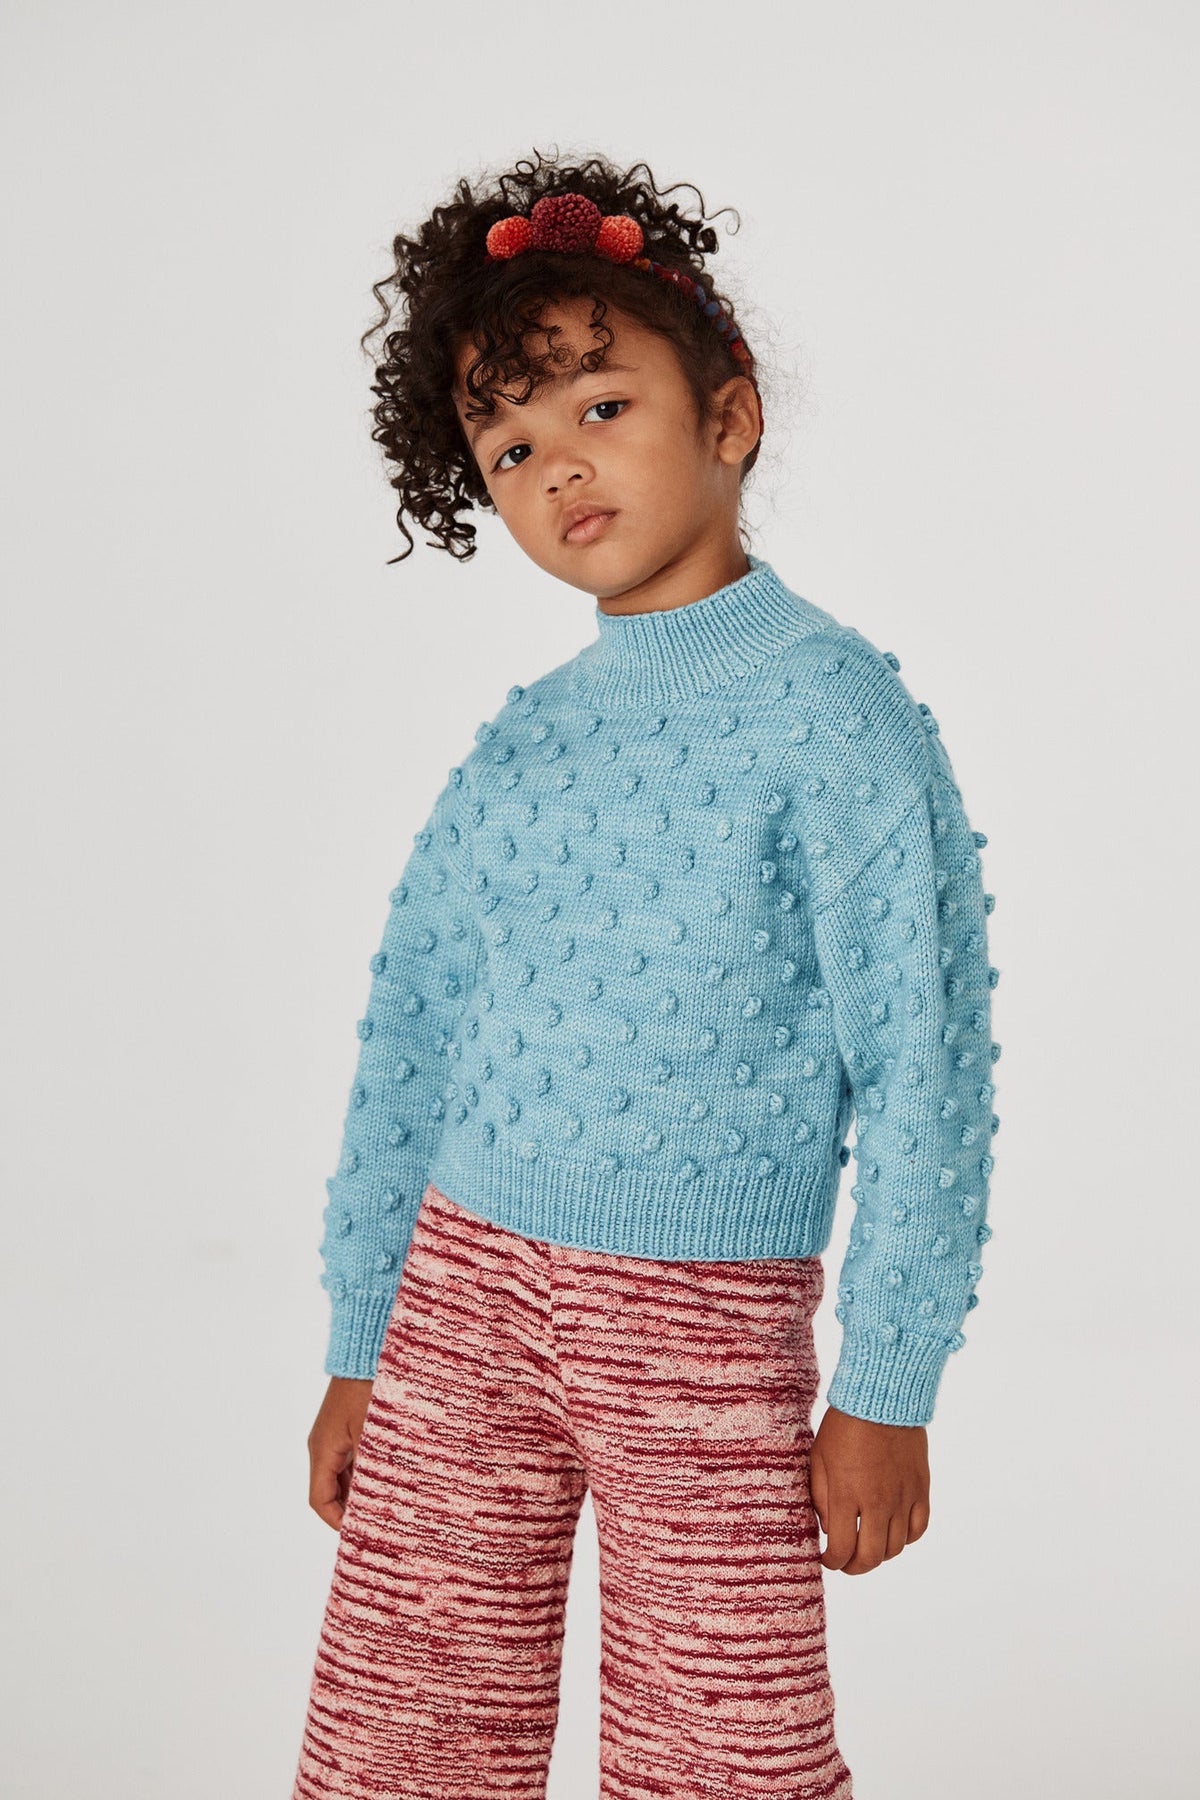 Mock Neck Popcorn Sweater - Faded Denim+Model is 45 inches tall, 44lbs, wearing a size 4y